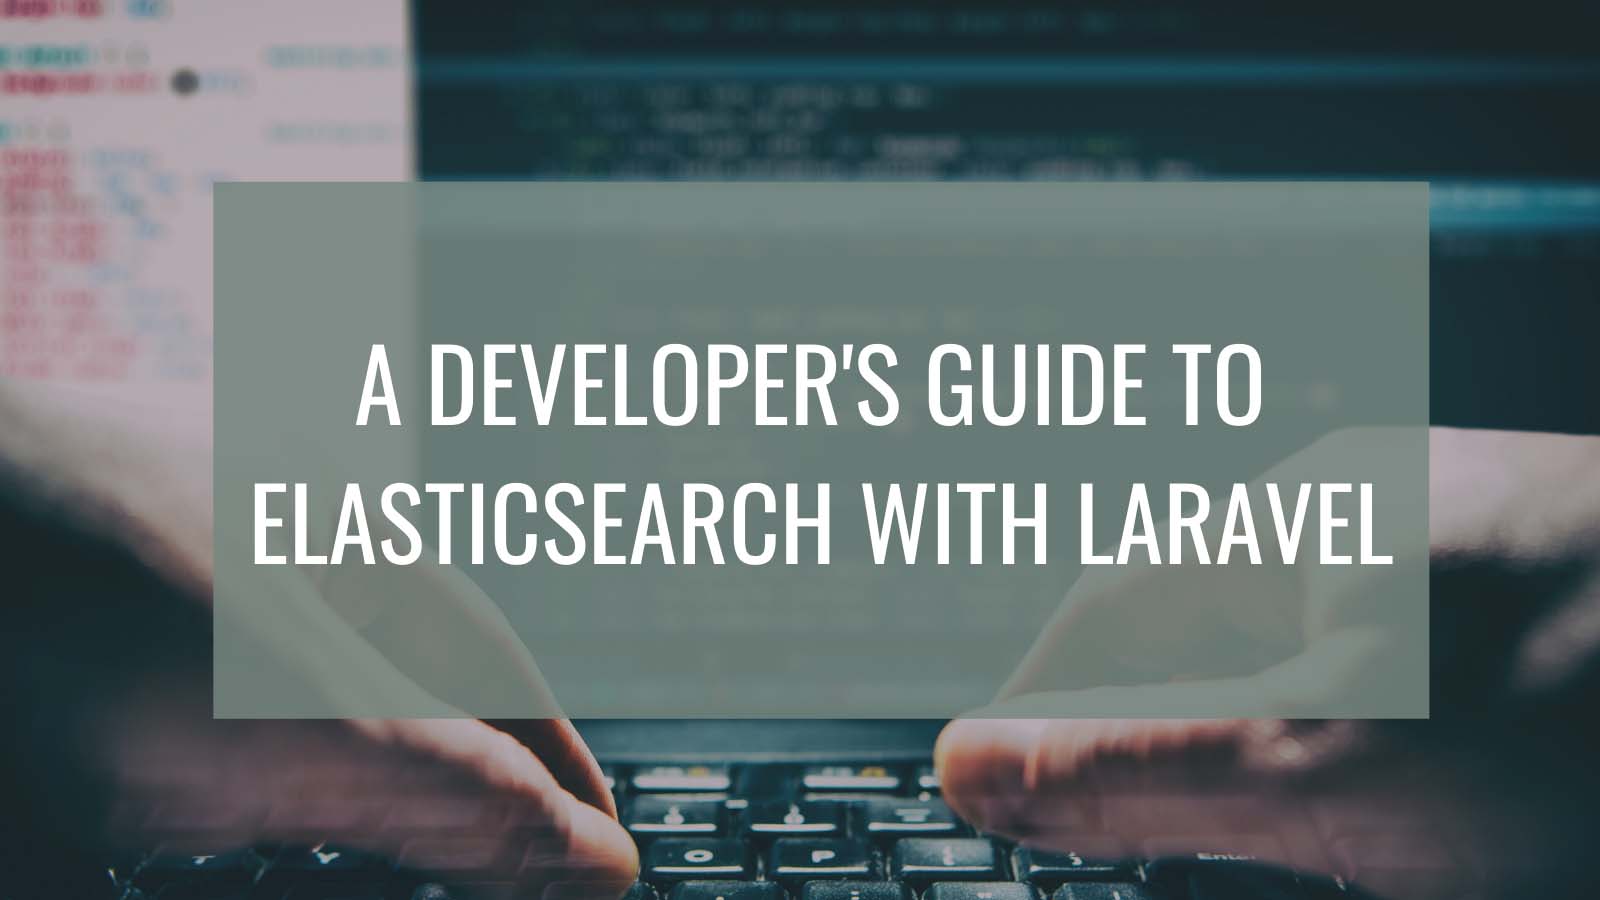 A Developer's Guide to Elasticsearch with Laravel